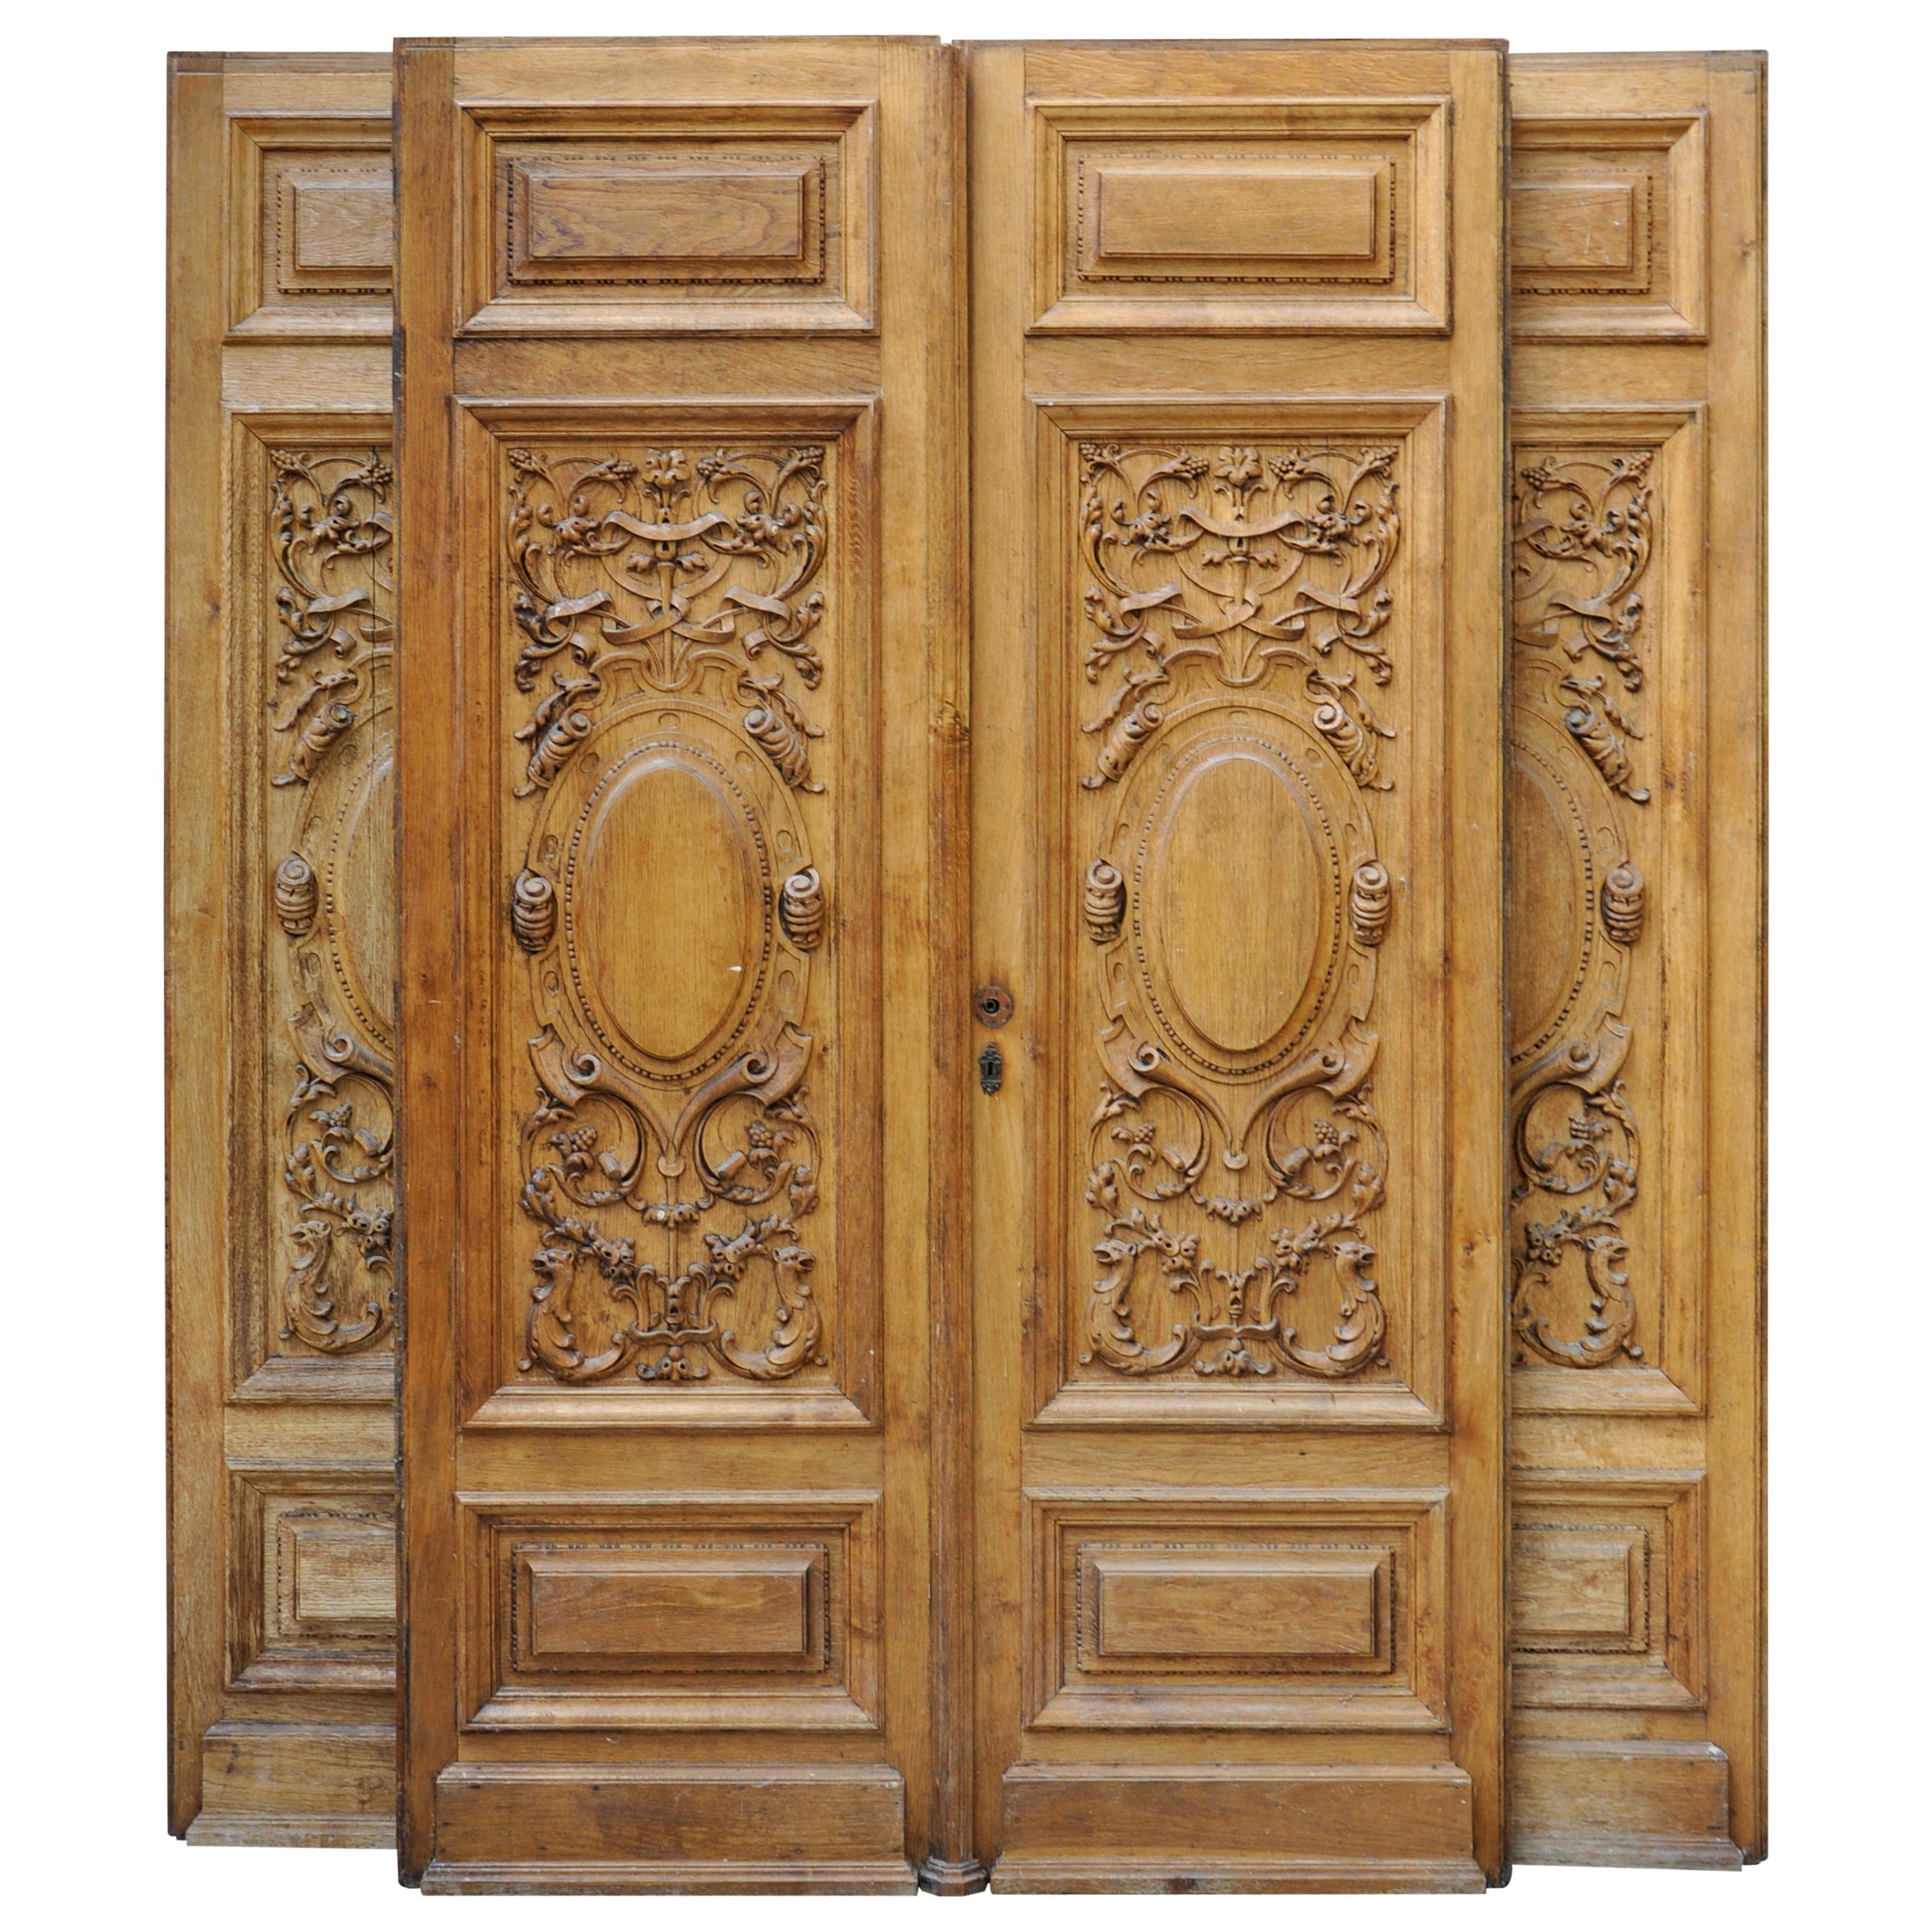 Pair of Carved Oak Double Doors from the 19th Century